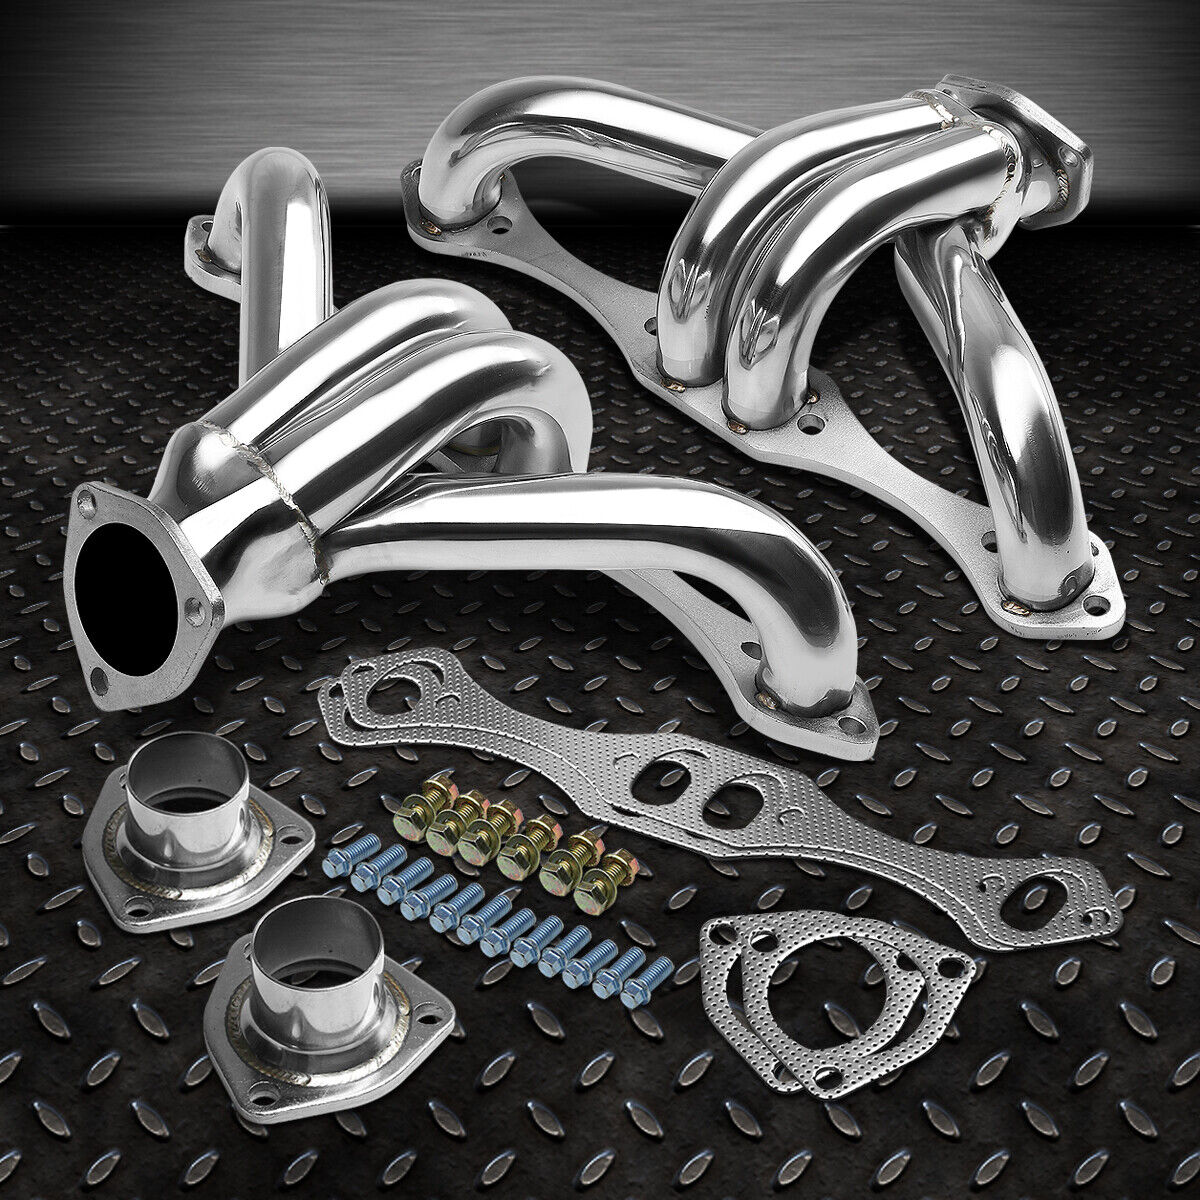 FOR CHEVY SMALL BLOCK SBC Gen 1/2 V8 STAINLESS STEEL EXHAUST HEADER MANIFOLD